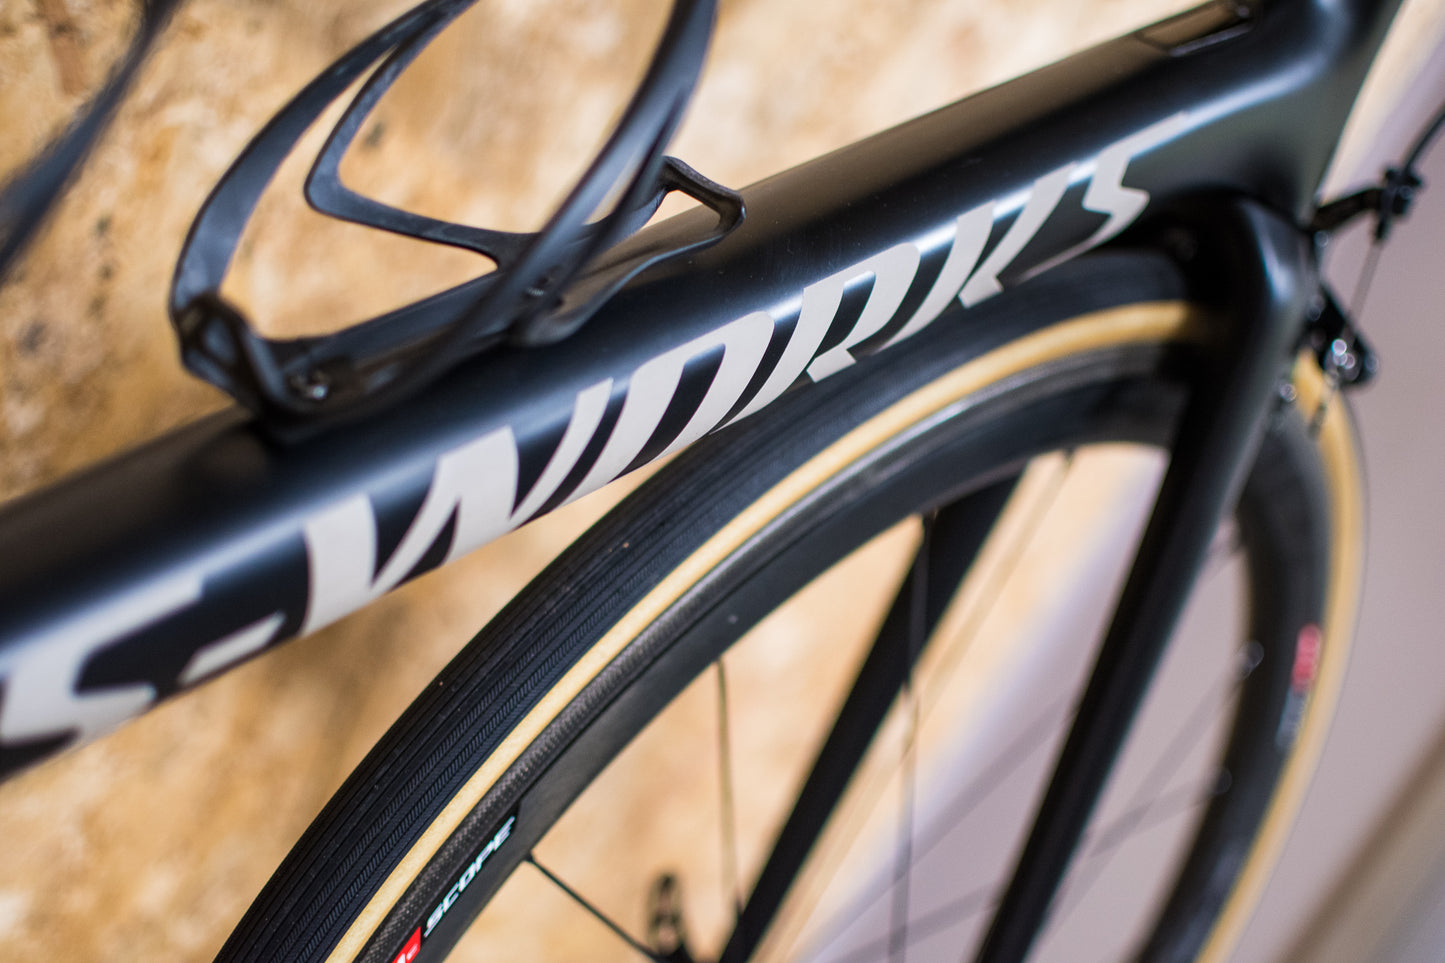 S-Works Specialized Tarmac SL6 Dura Ace Di2 carbon racefiets